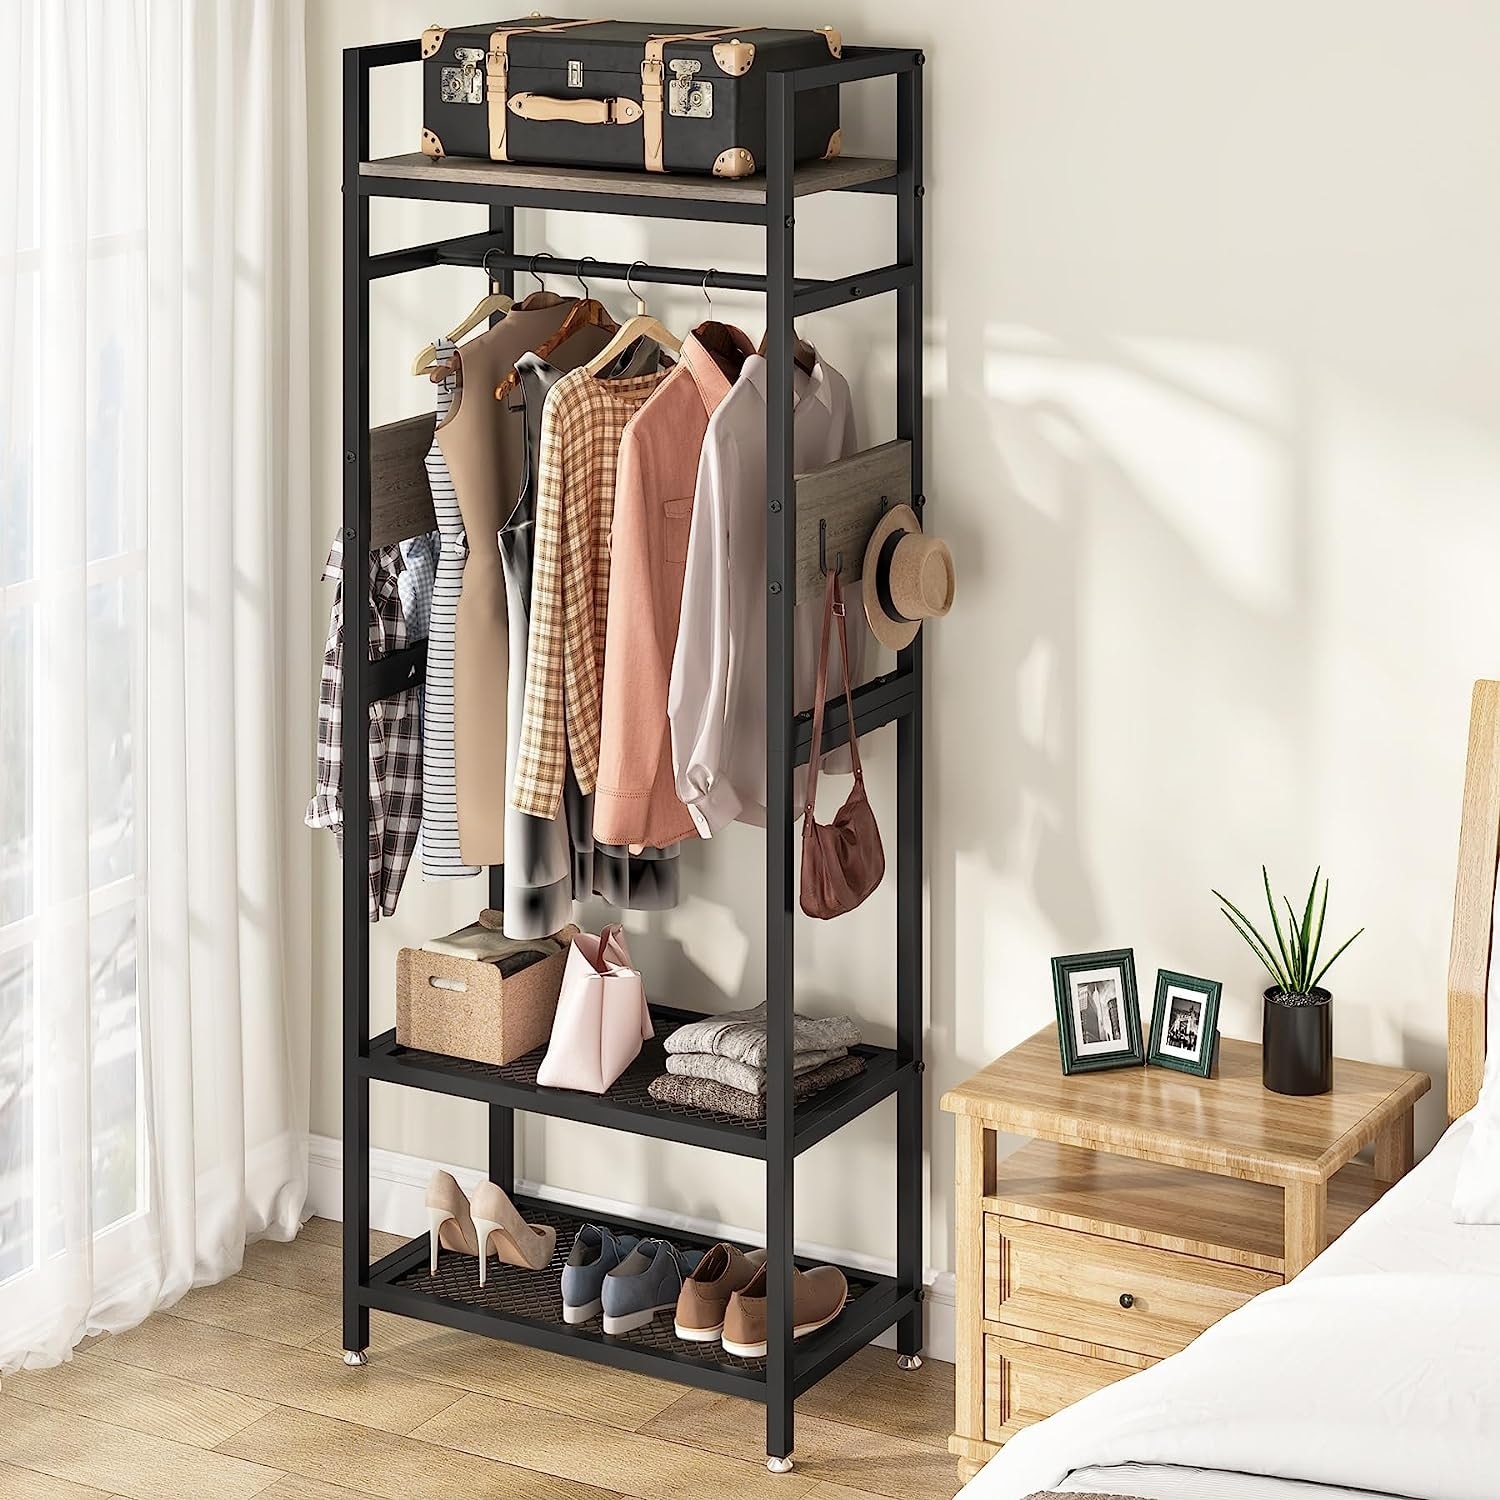 https://ak1.ostkcdn.com/images/products/is/images/direct/91898e80df616e0a3d9bbe63cf2ffe102a5e402d/Industrial-Clothing-rack-with-shelves%2C-Small-Clothes-rack-Hall-Tree%2Cfreestanding-closet-organizer.jpg